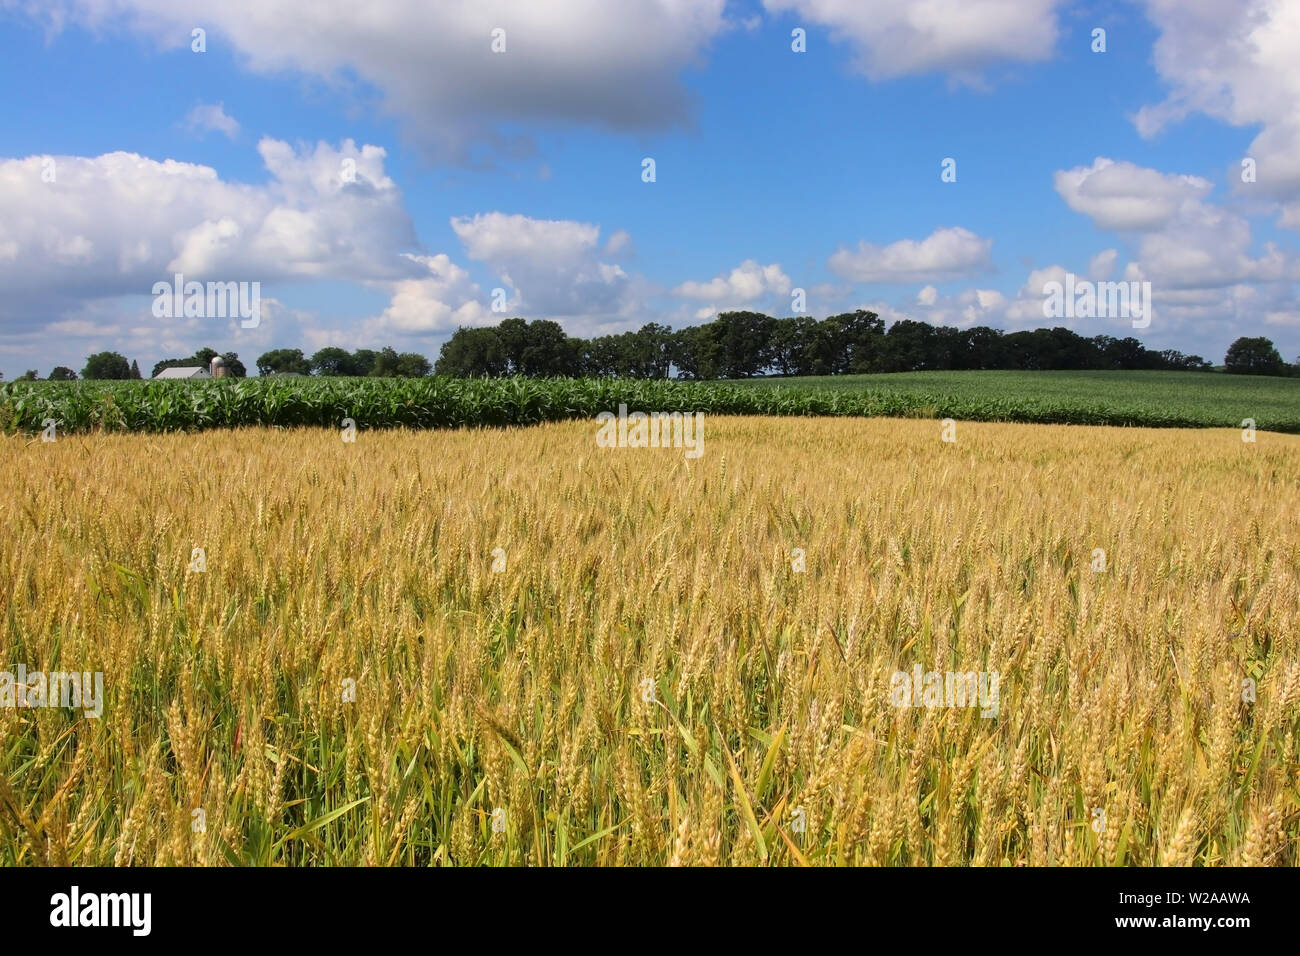 Rural landscape with riping wheat field on a foreground. Beautiful summer countryside nature background, Wisconsin, Midwest USA. Harvest concept. Stock Photo